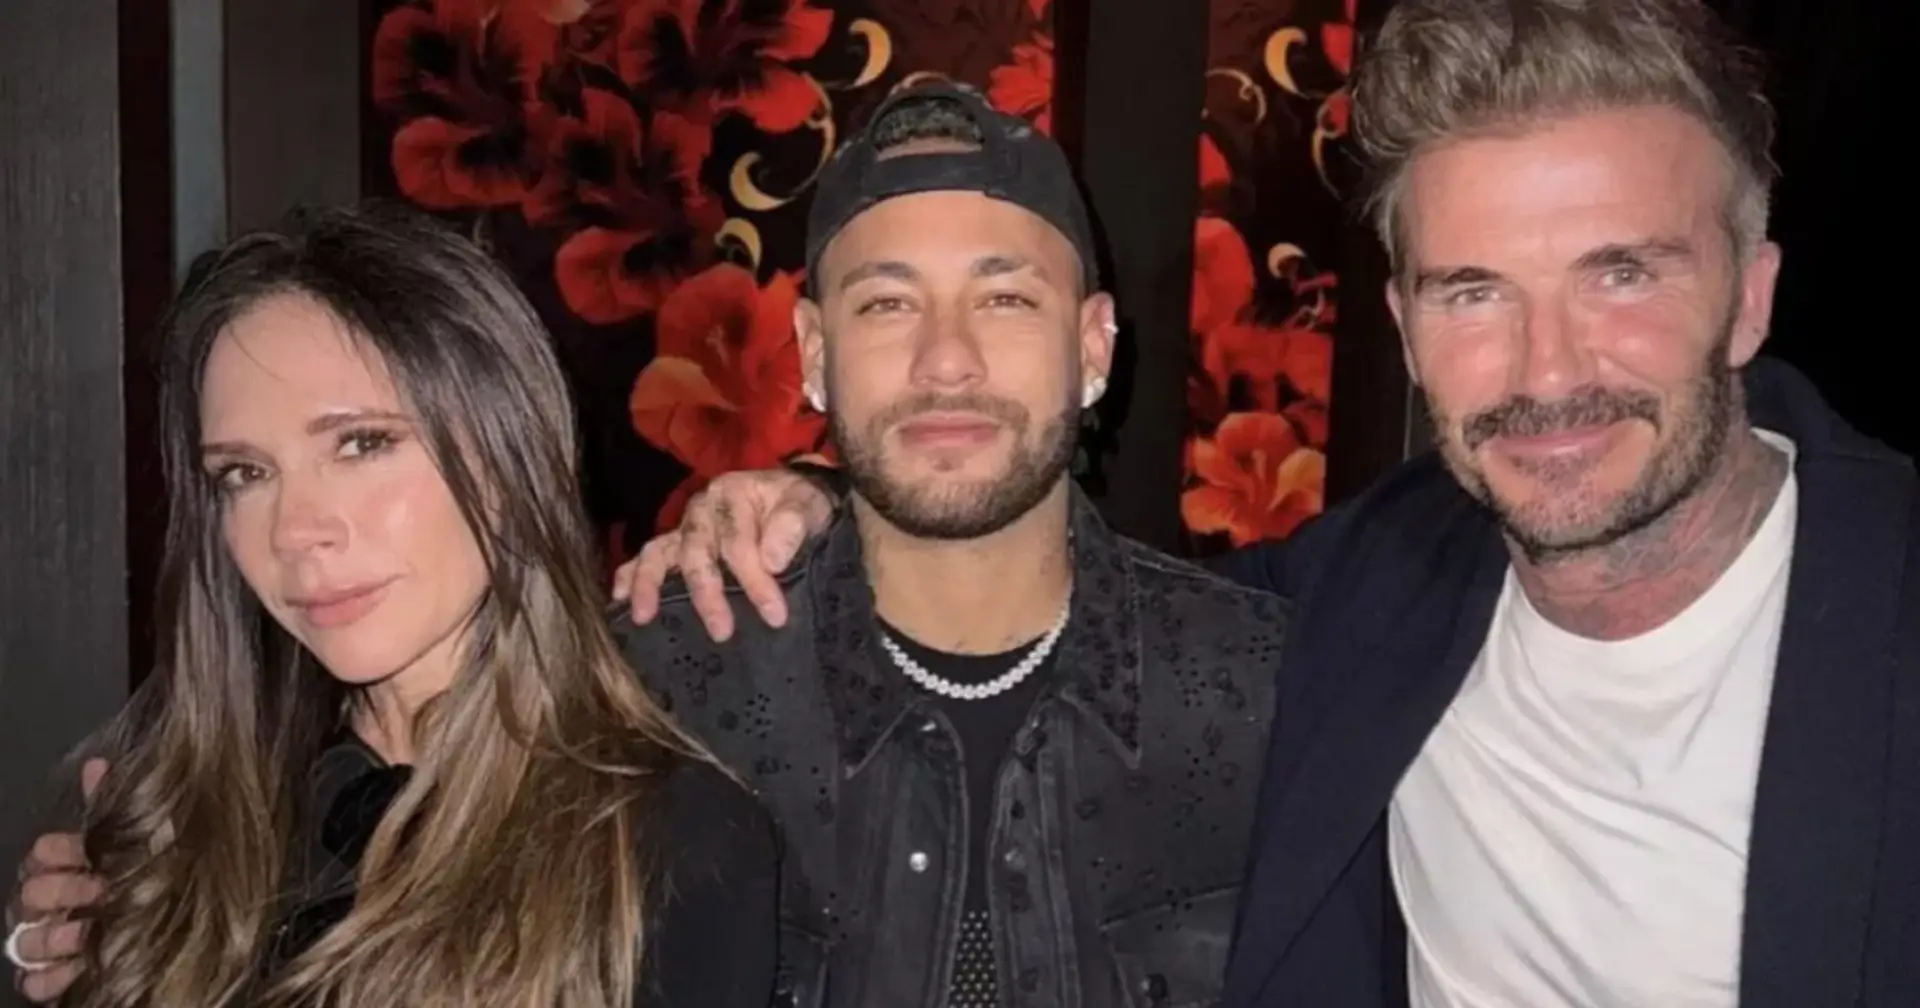 '😂 Thank u Boss': Neymar comments on a teasing photo of him and Beckham in Miami